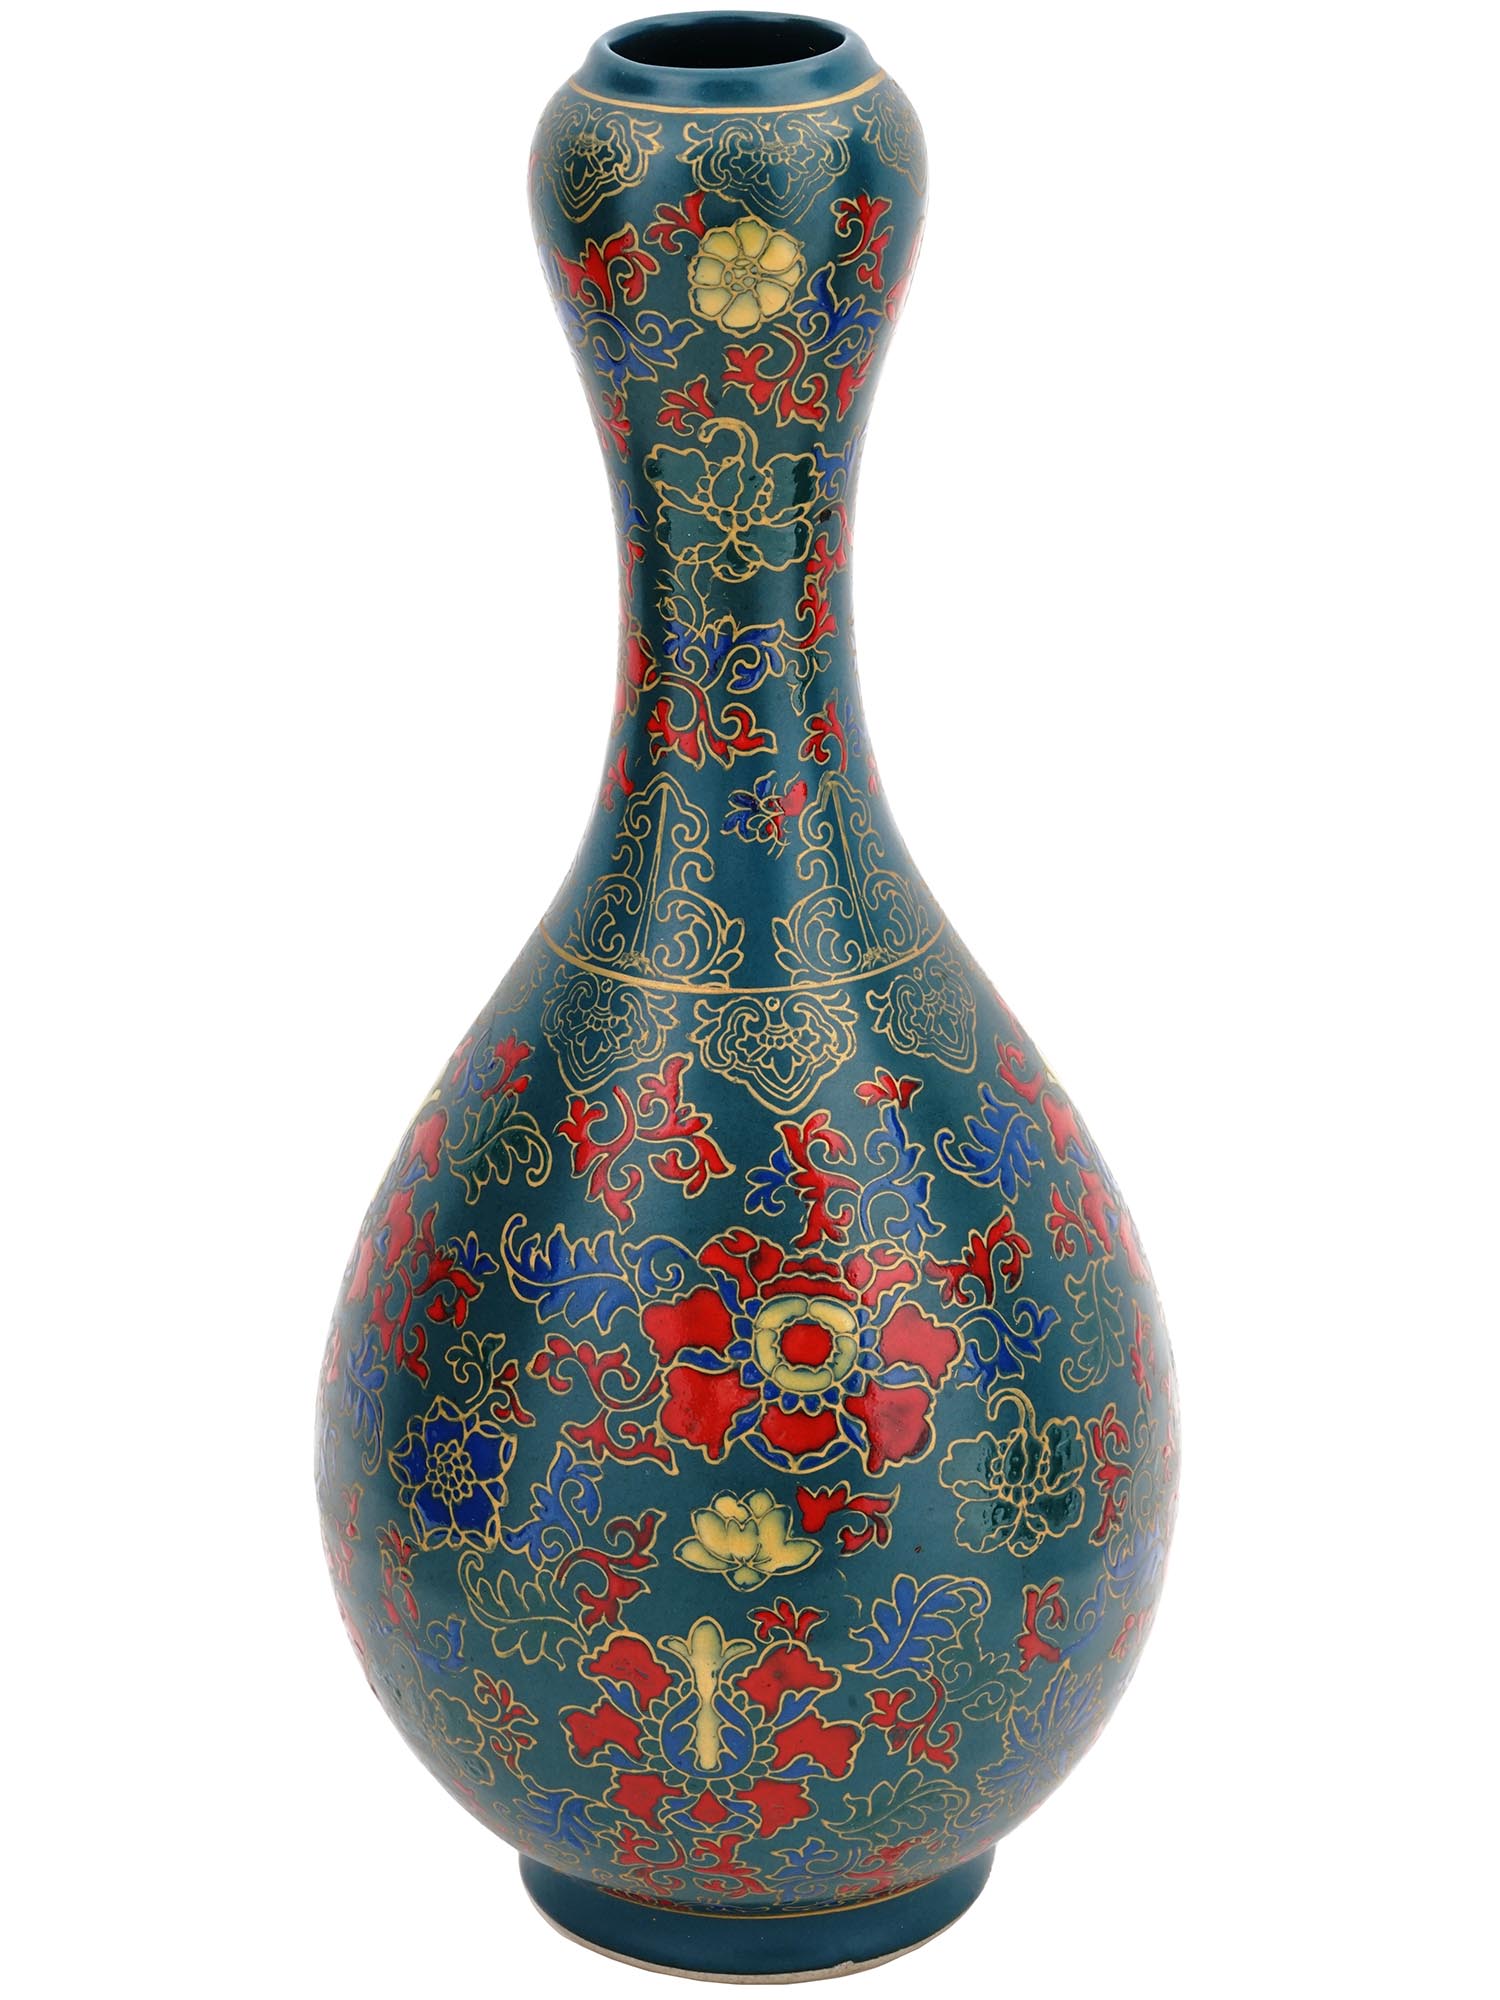 ANTIQUE CHINESE CERAMIC CLOISONNE GOURD SHAPED VASE PIC-0